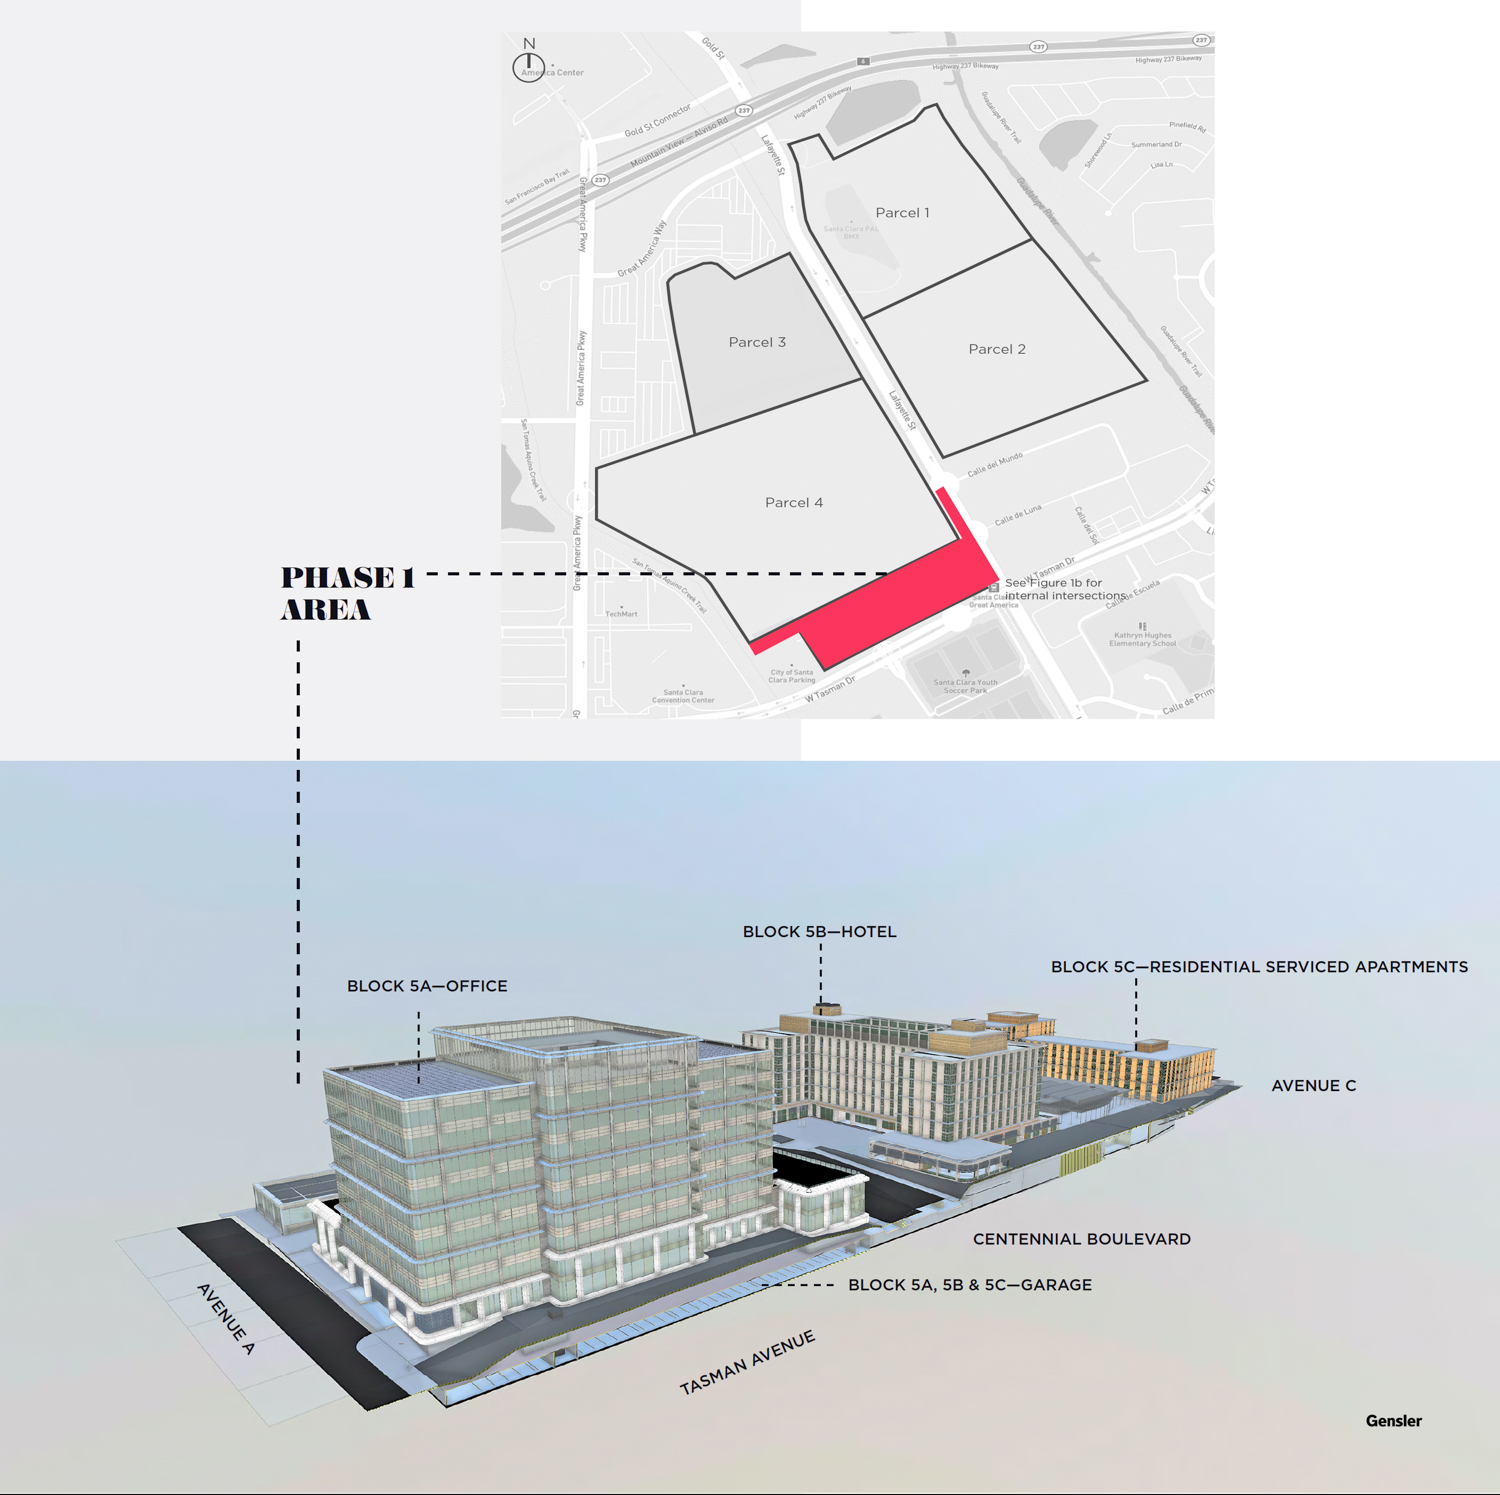 Related Santa Clara Block 5 elevation and overall site map, rendering via Gensler design by Foster and Partners